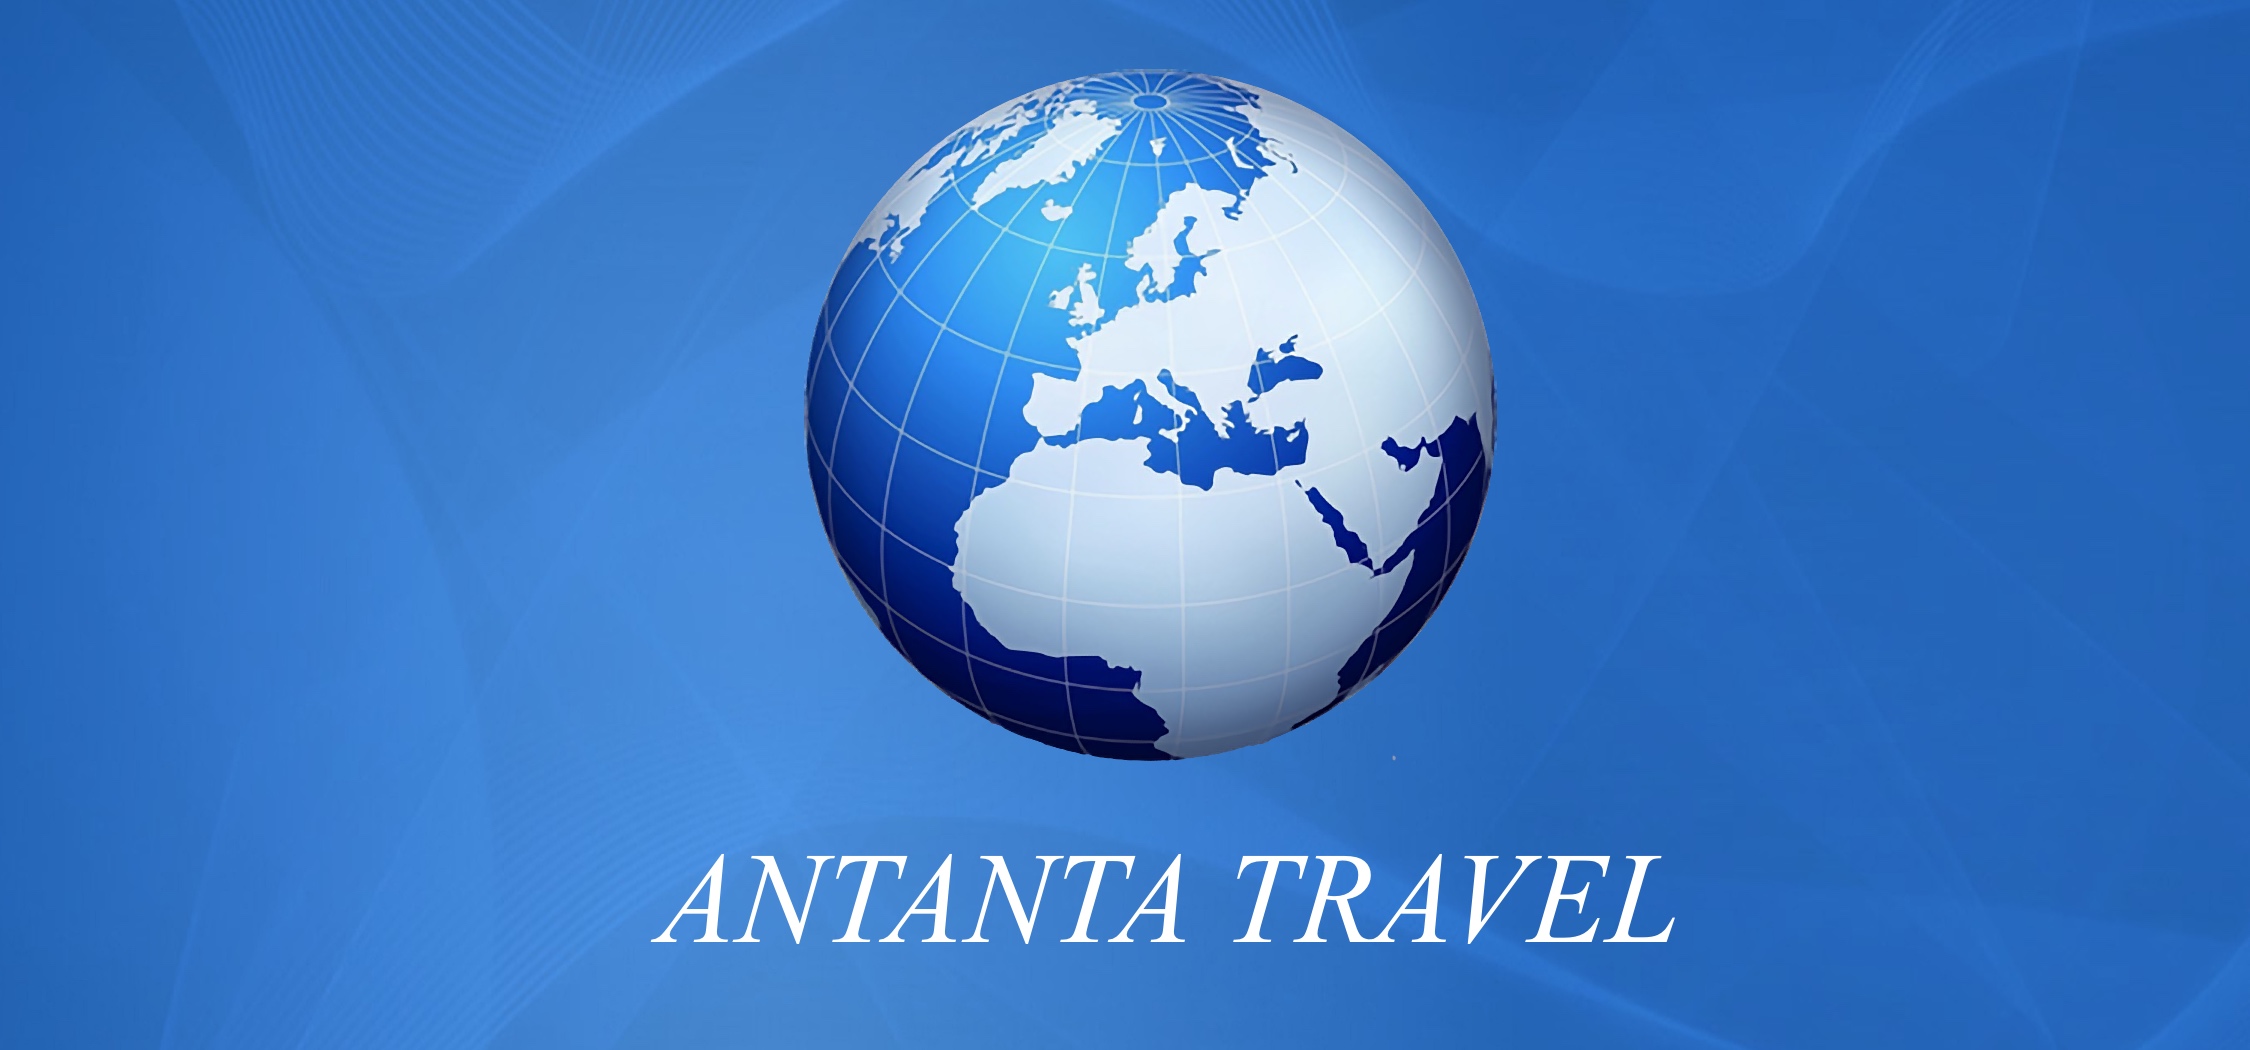 Payment for Antanta Travel services